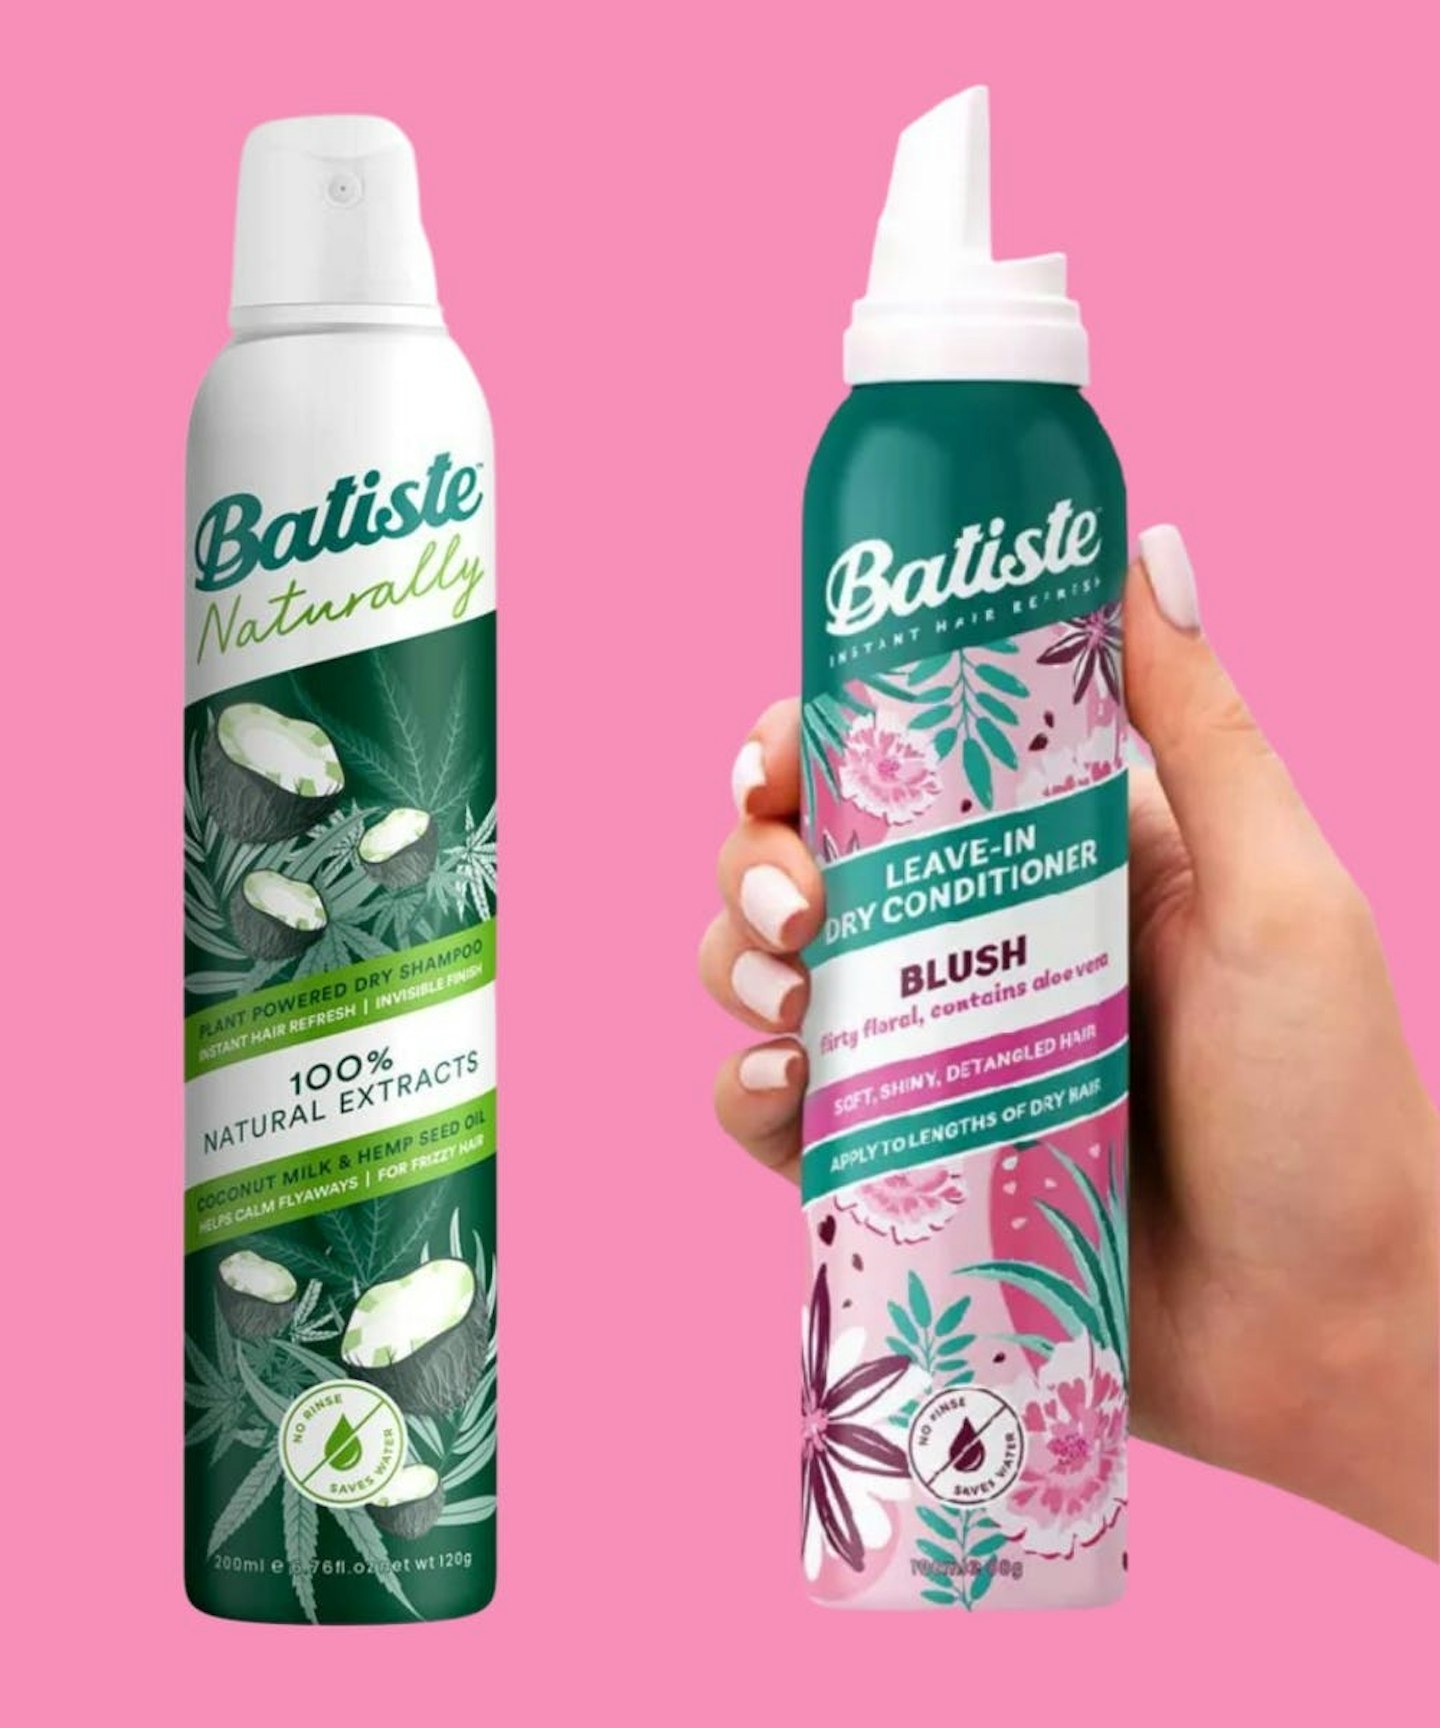 Batiste Naturally Dry Shampoo & Batiste Leave-In Dry Conditioner